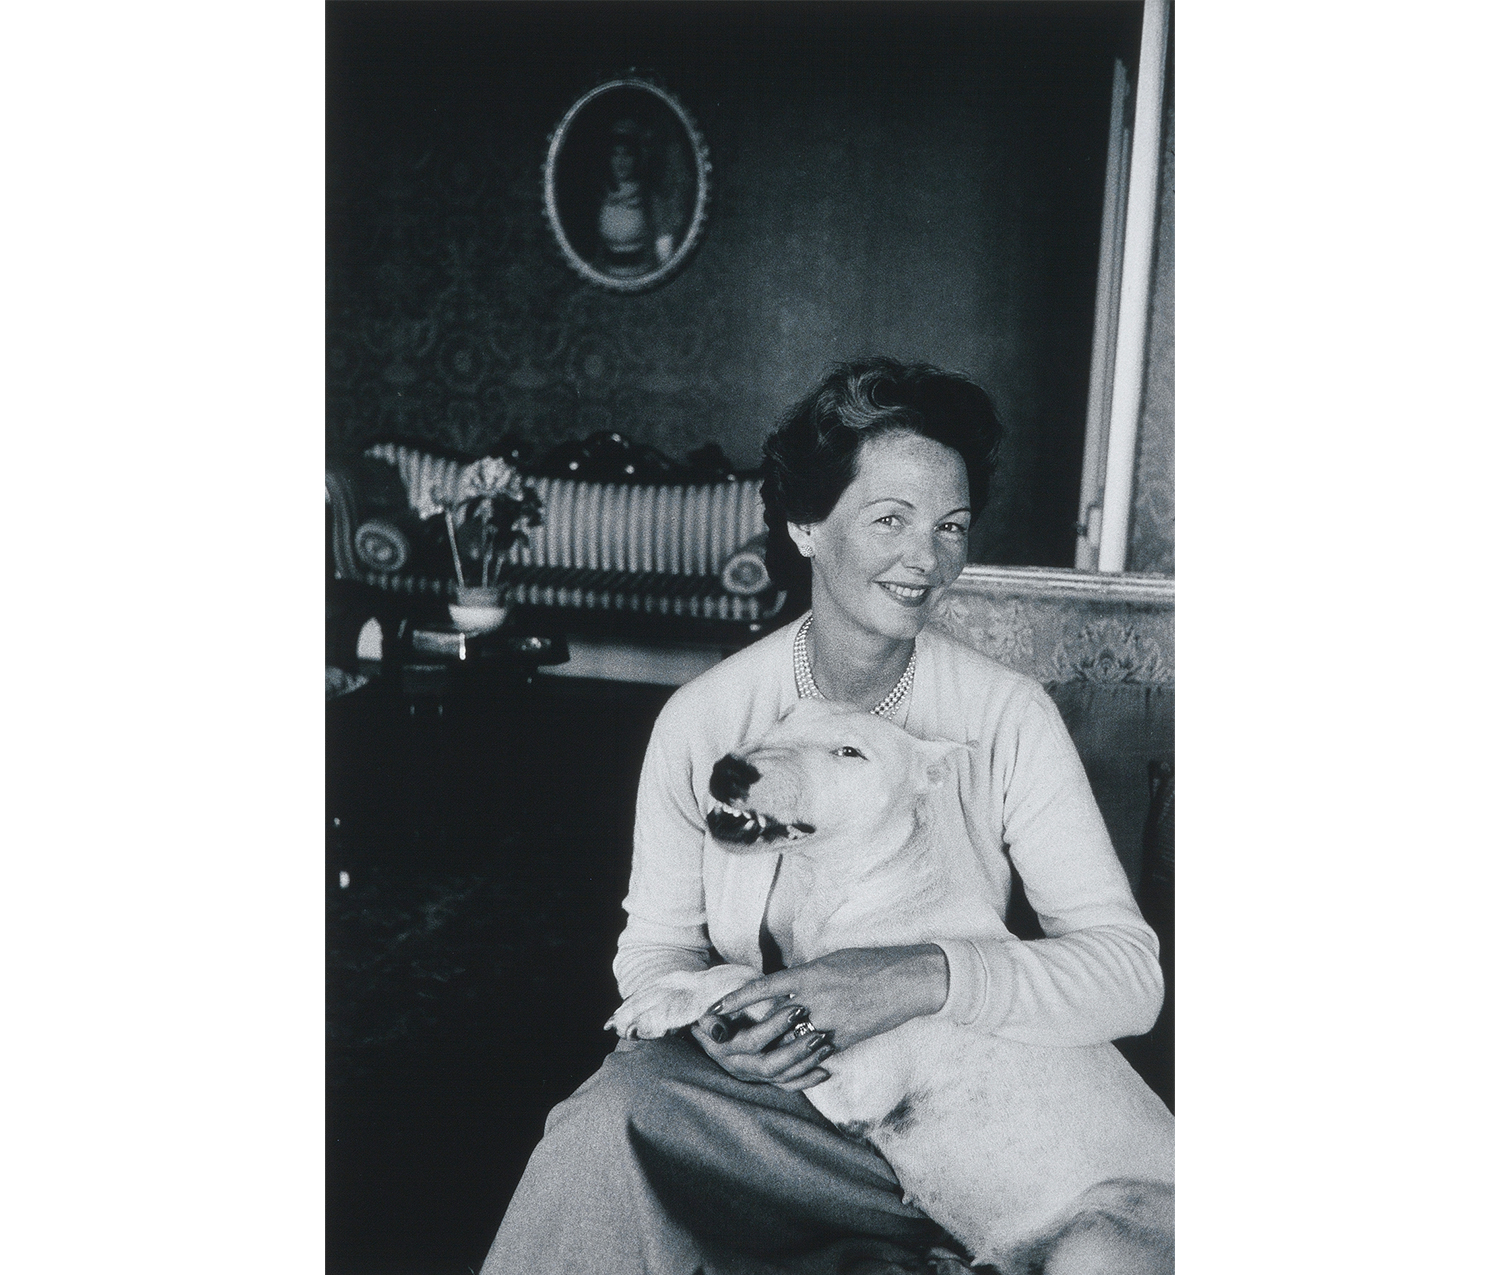 interior, woman in light sweater set and skirt, pearls, dark hair holding large white dog at front right, sofa, table, flowers, oval portrait visible in background